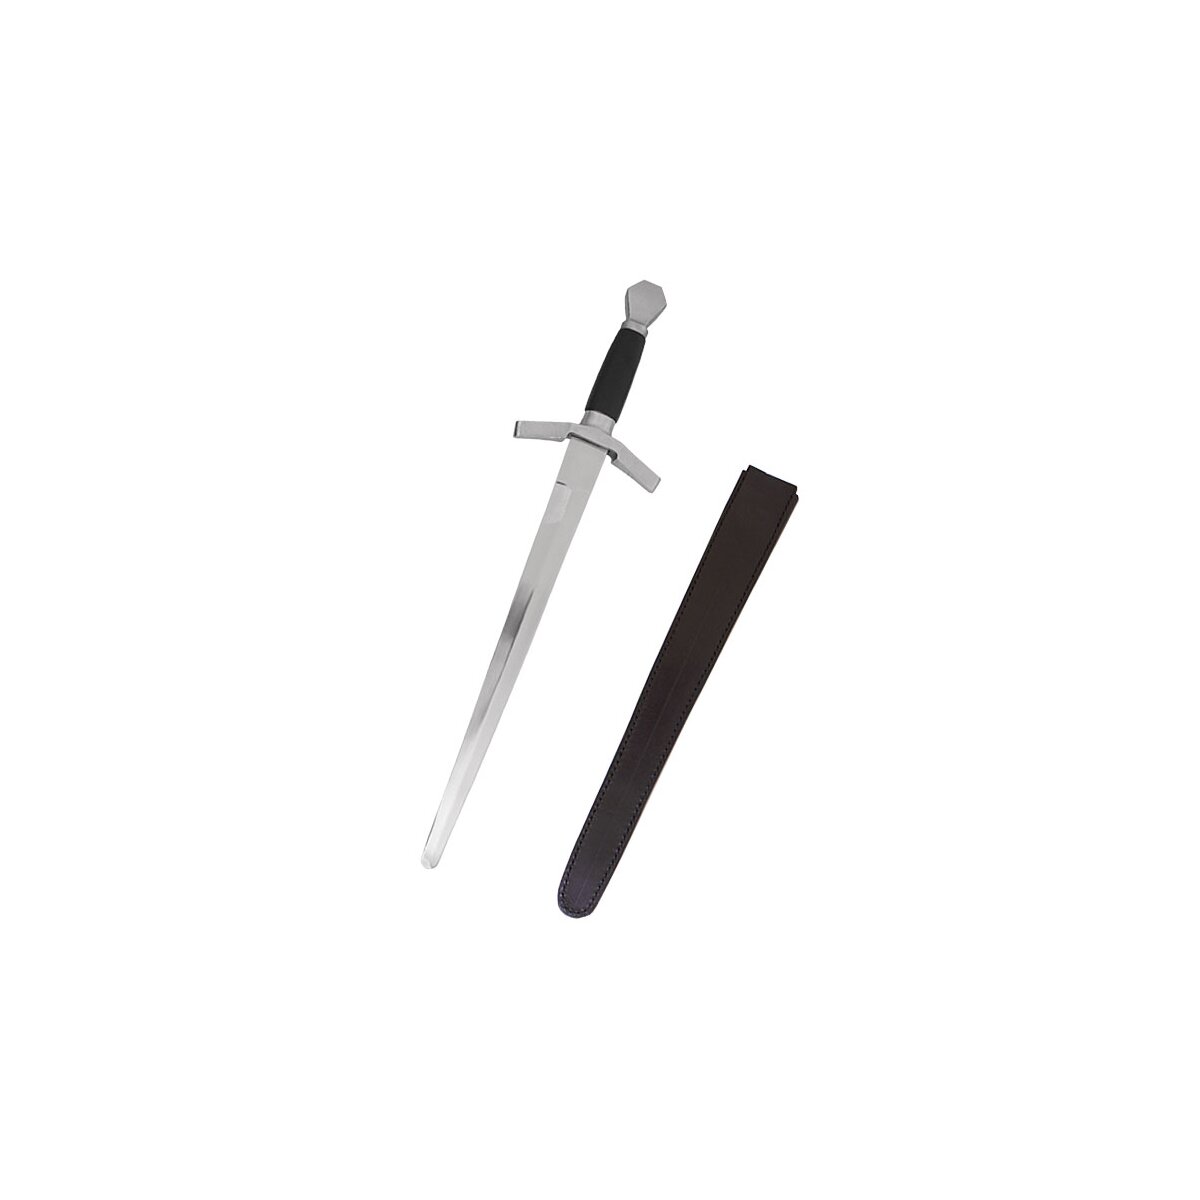 Medieval Dagger, battle-ready, with leather scabbard